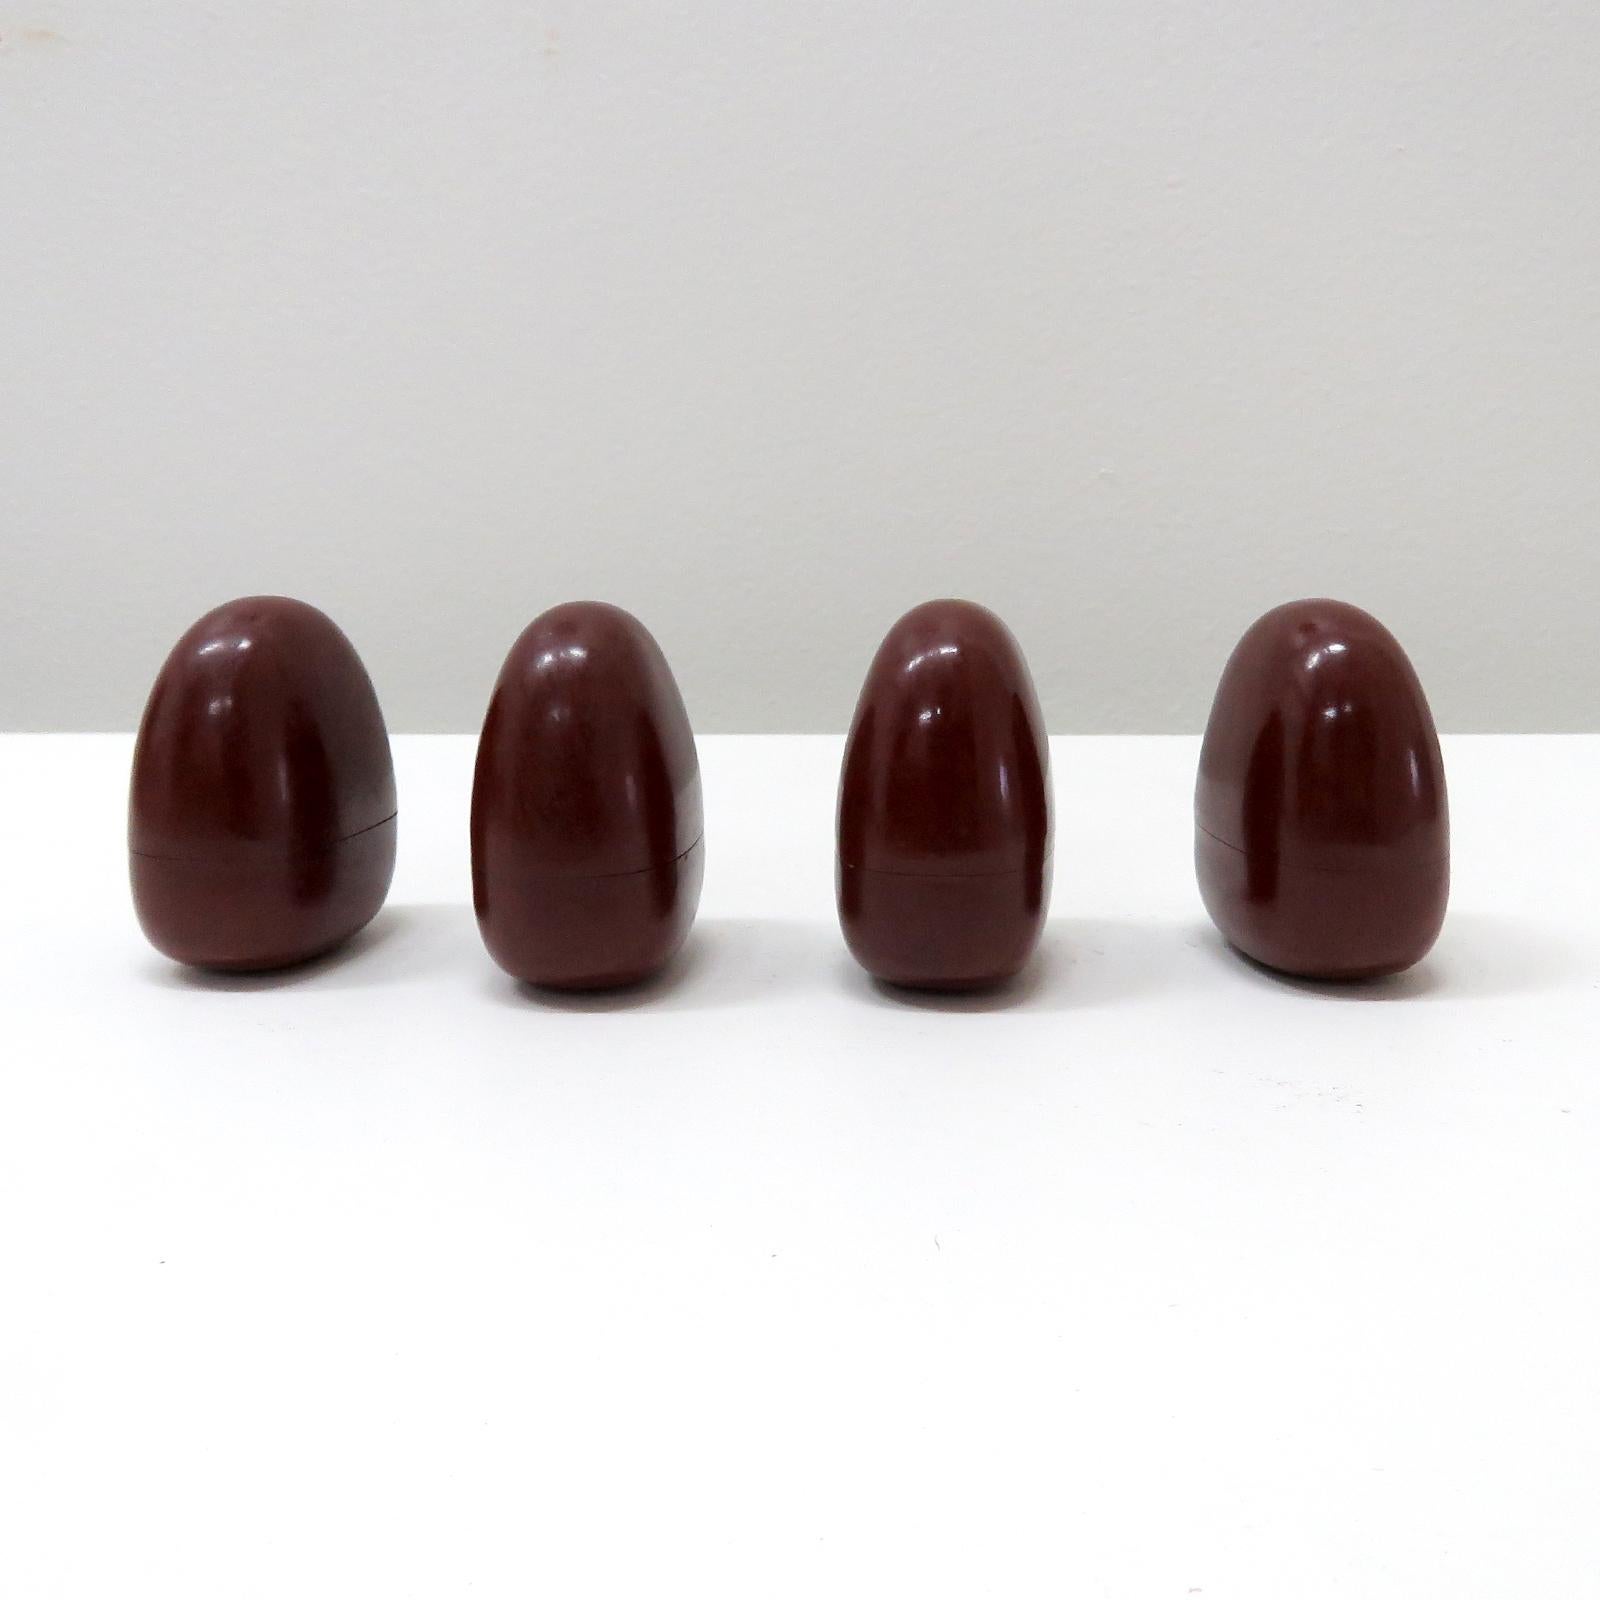 Sculptural darning eggs in maroon bakelite, Germany 1930, two part eggs (for easy storage of needles & thread), marked with a DRP (Deutsches Reich Patent) number.